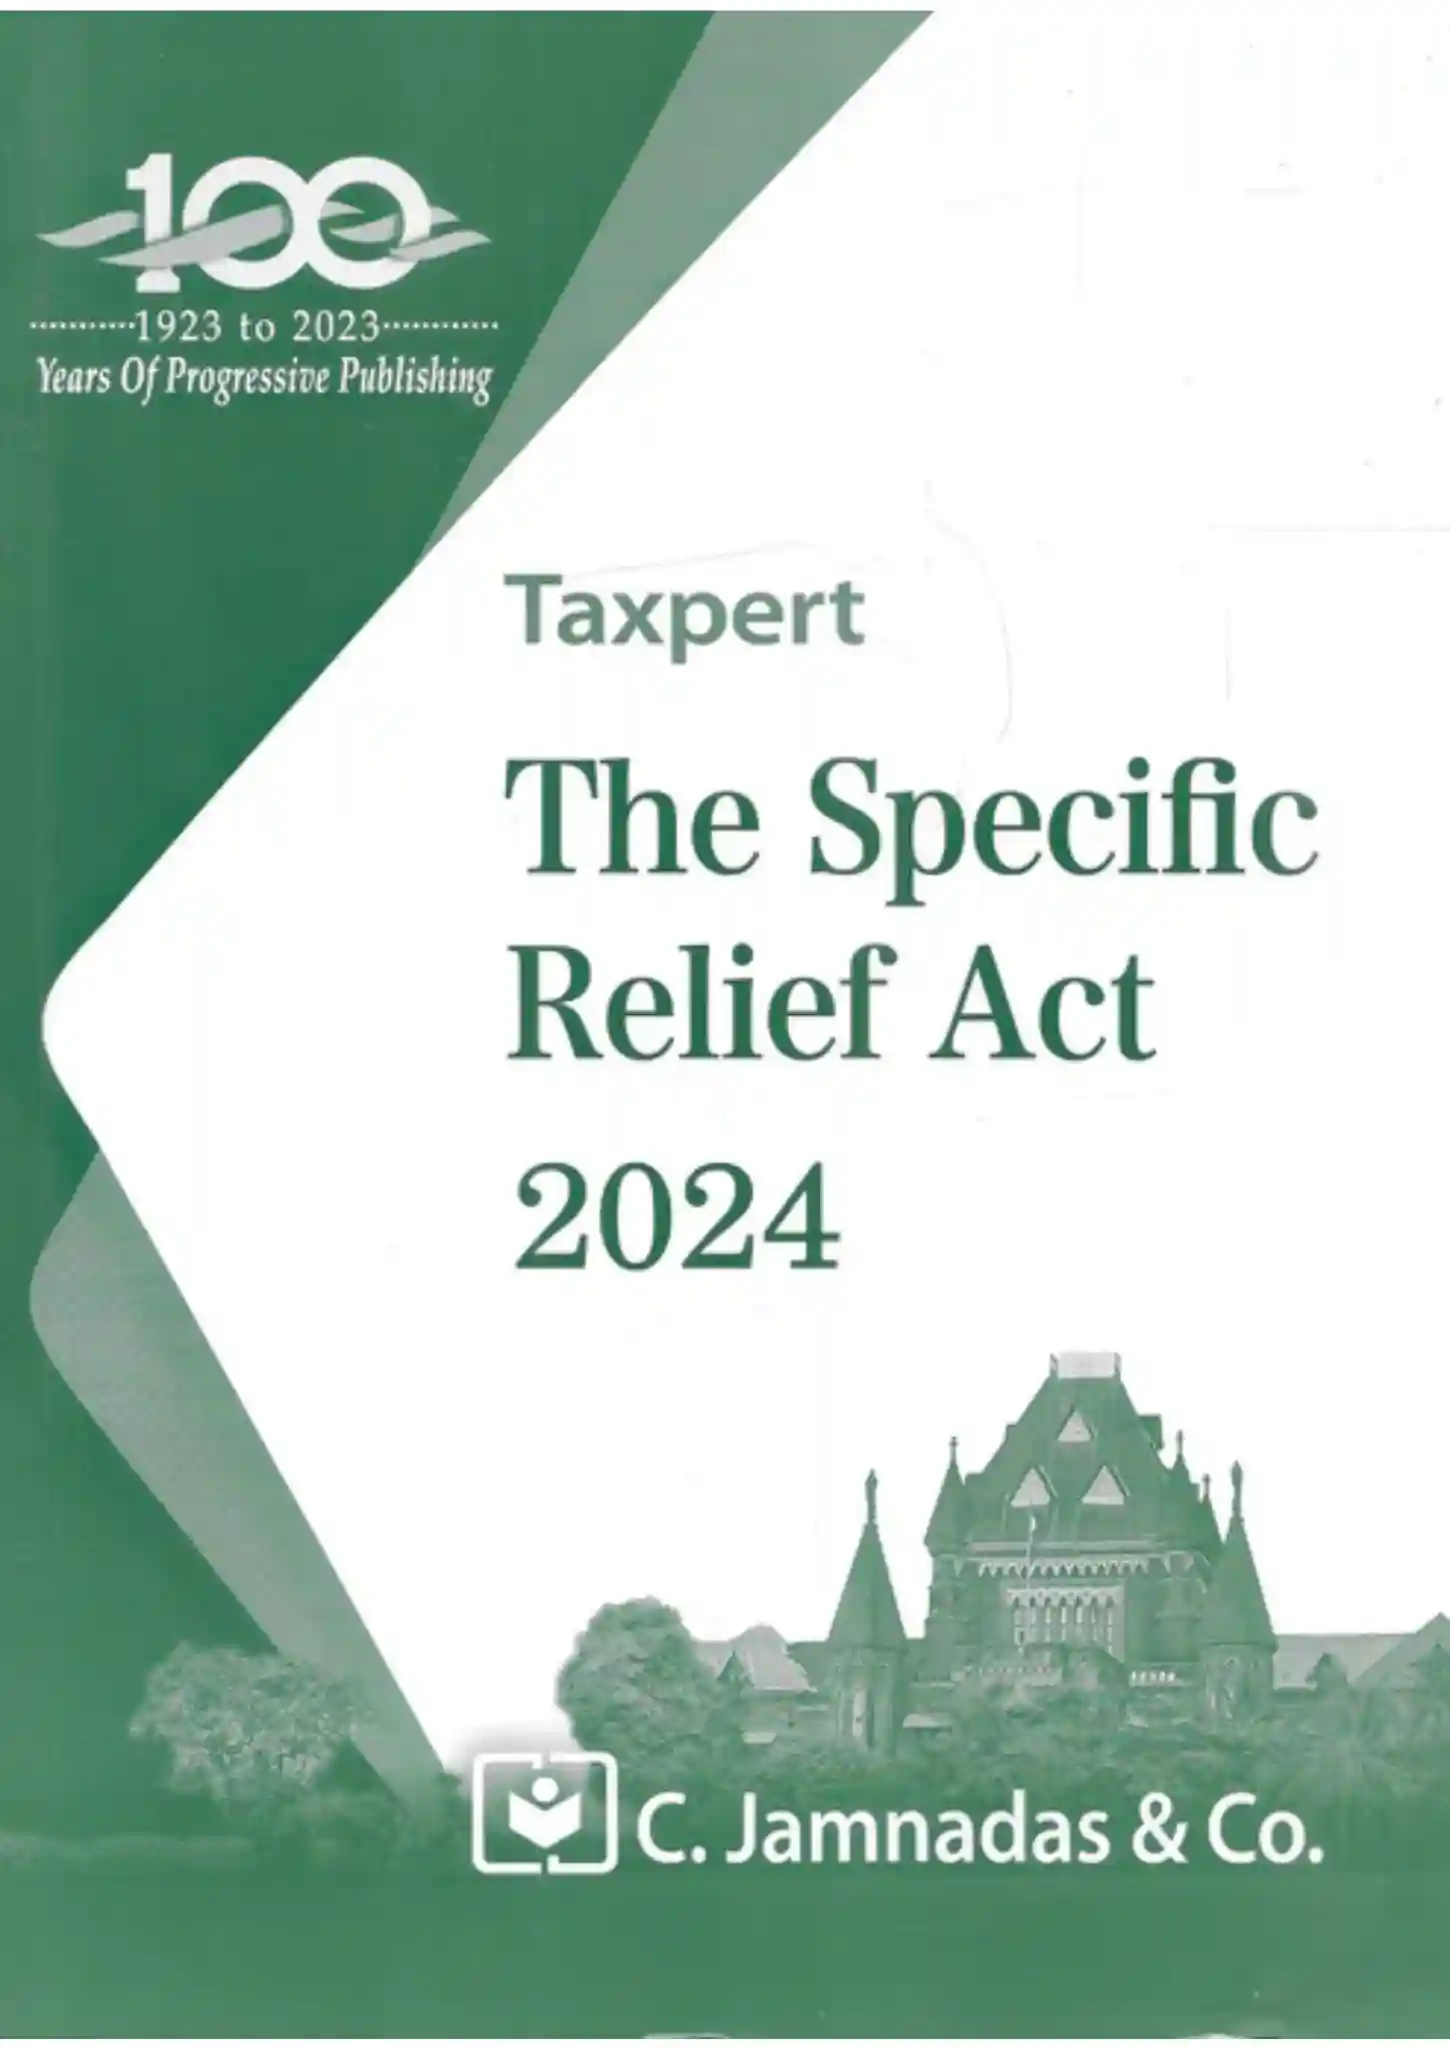  The Specific Relief Act 2024